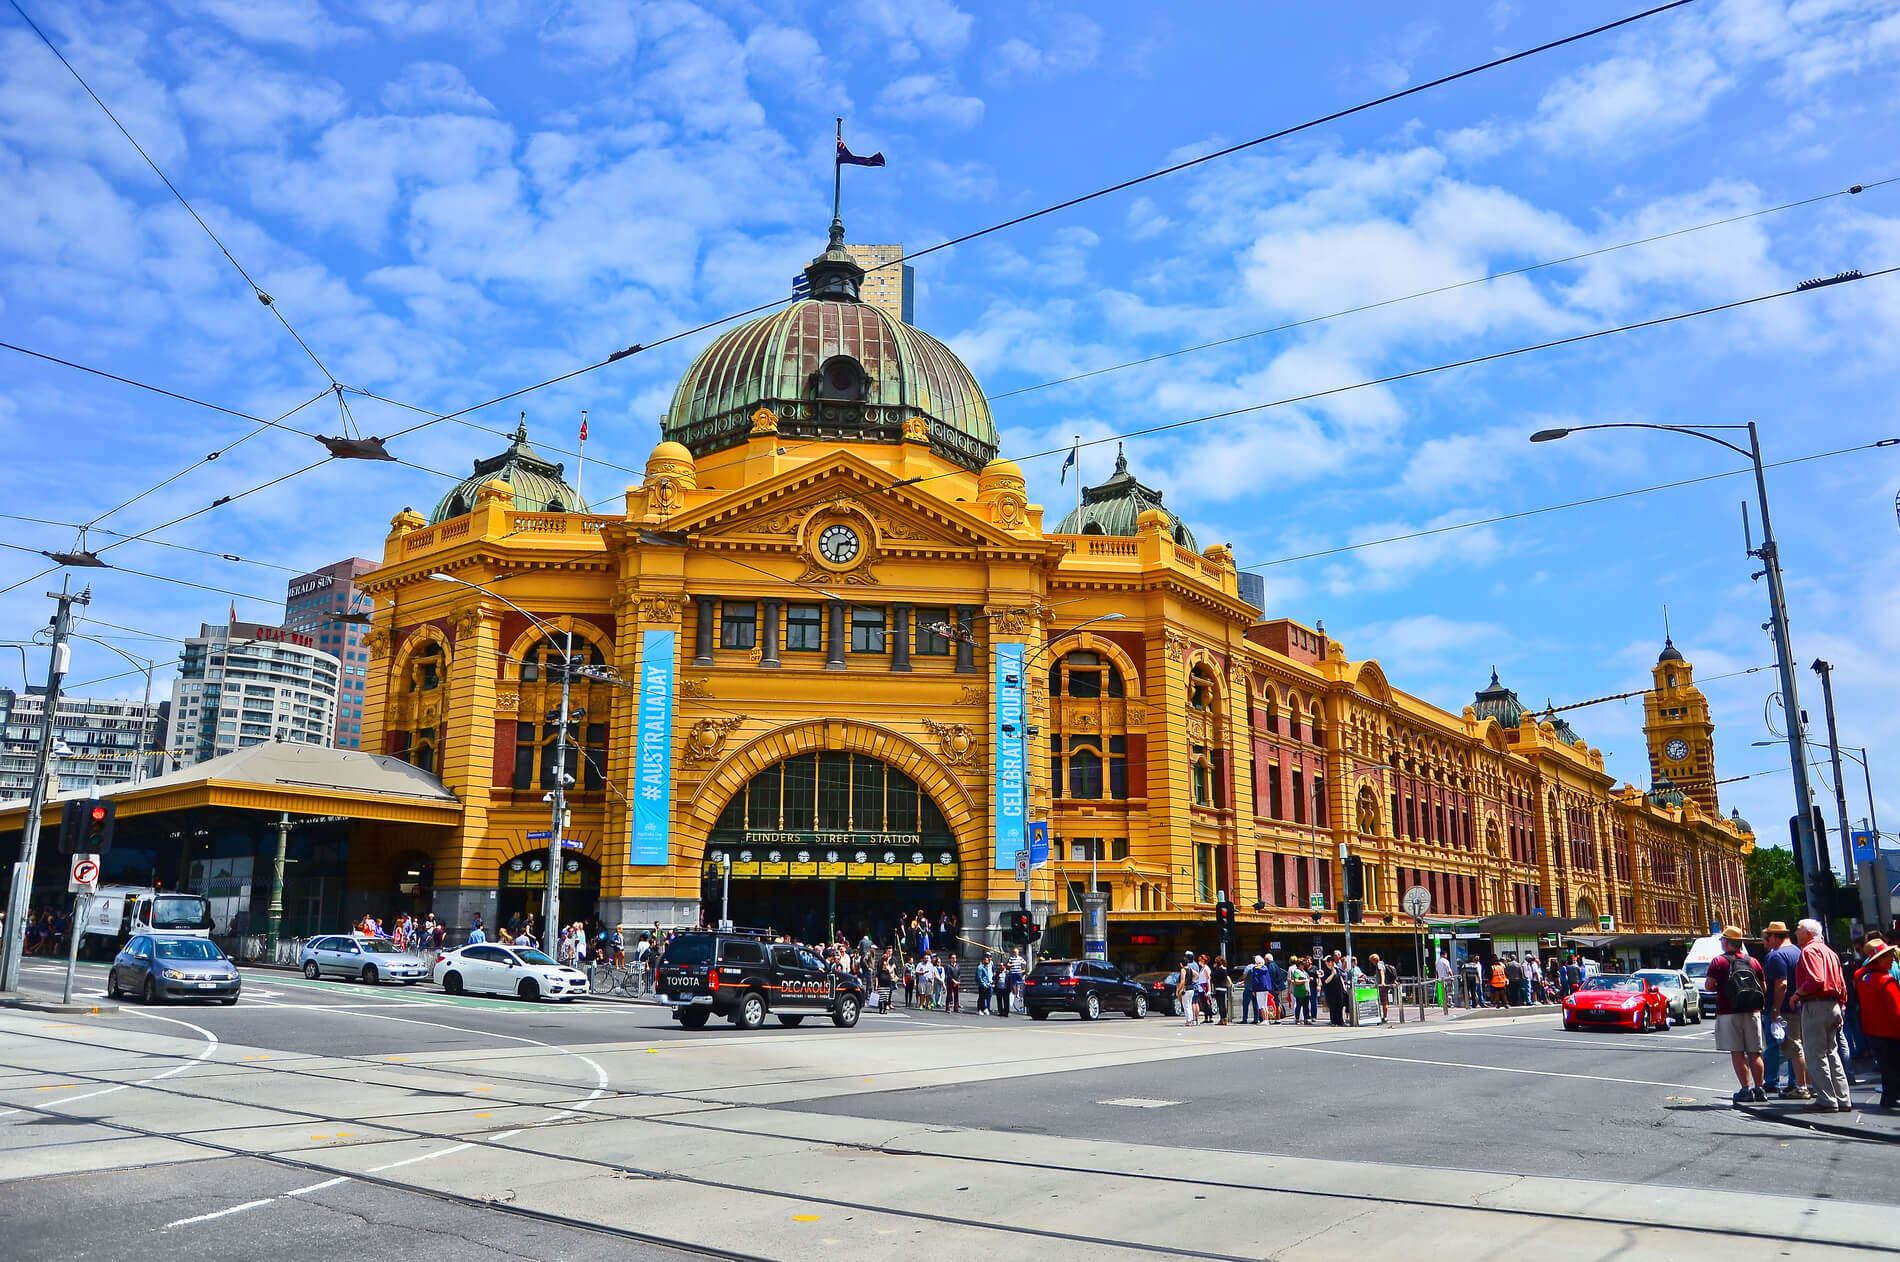 Cars and passengers in front of Flinders Street Station